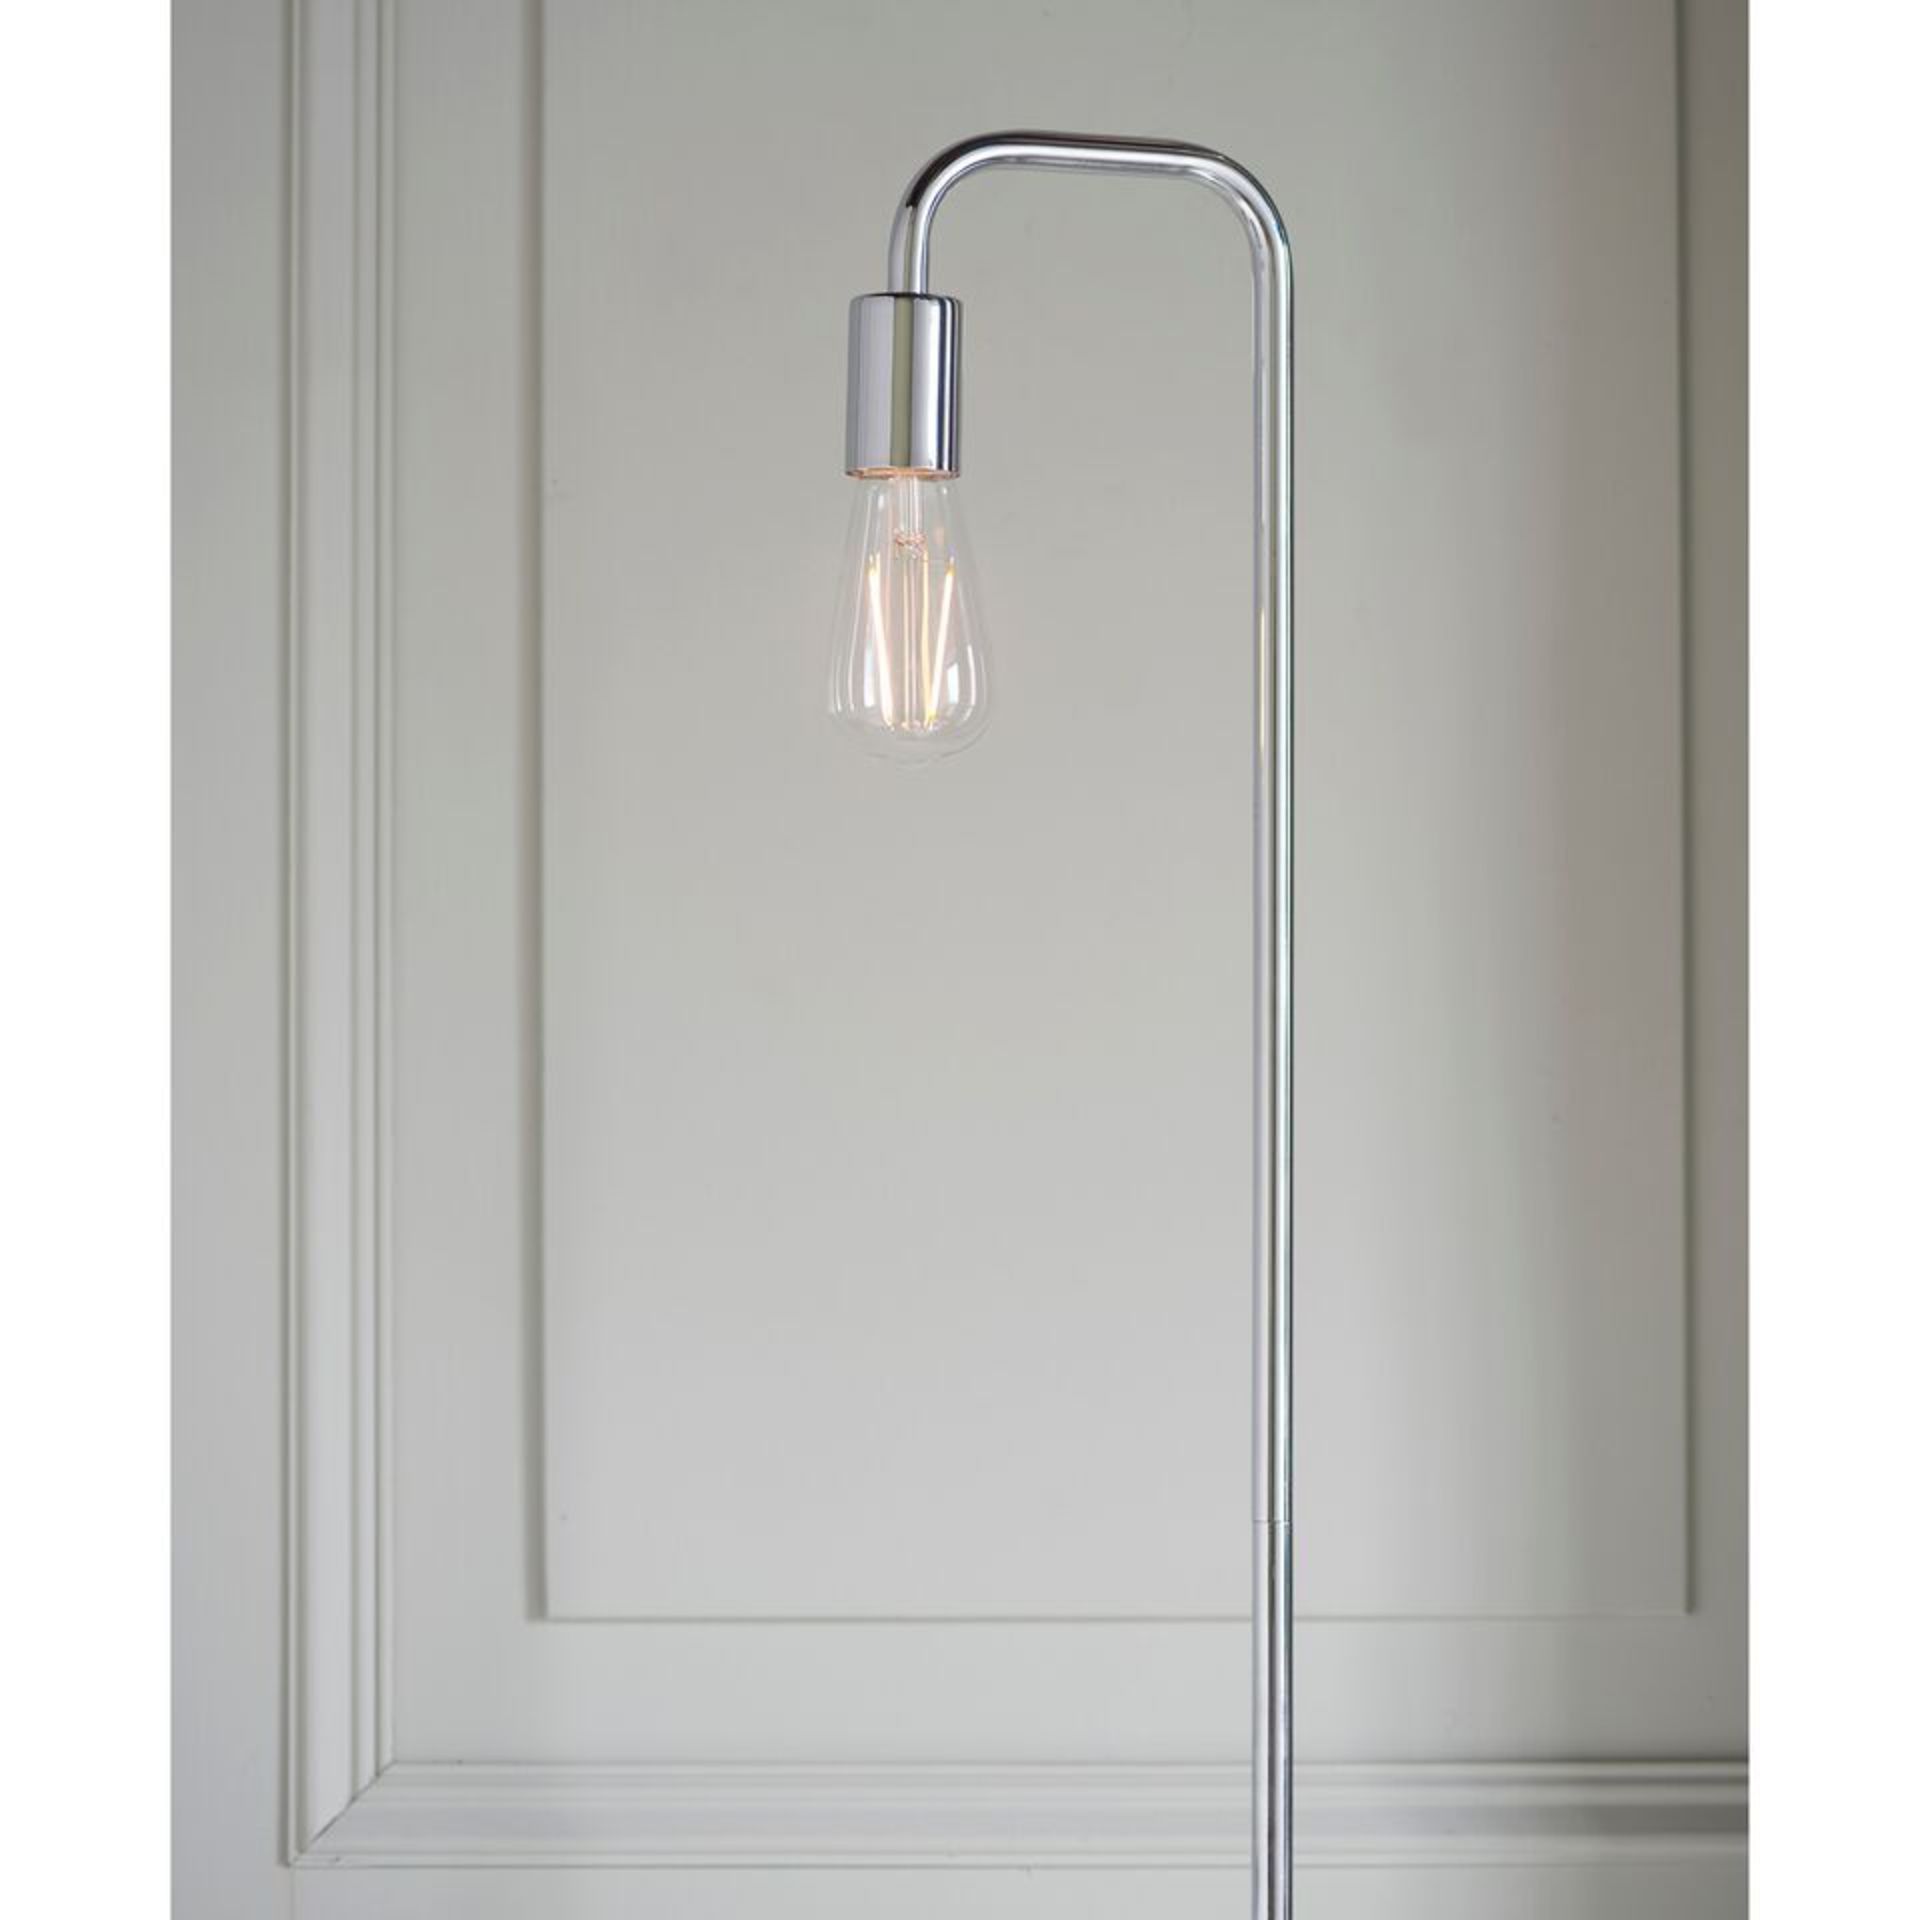 Rubens Floor Lamp Chrome The Rubens 1 Light Industrial Style Floor Lamp In Polished Chrome. An - Image 2 of 2